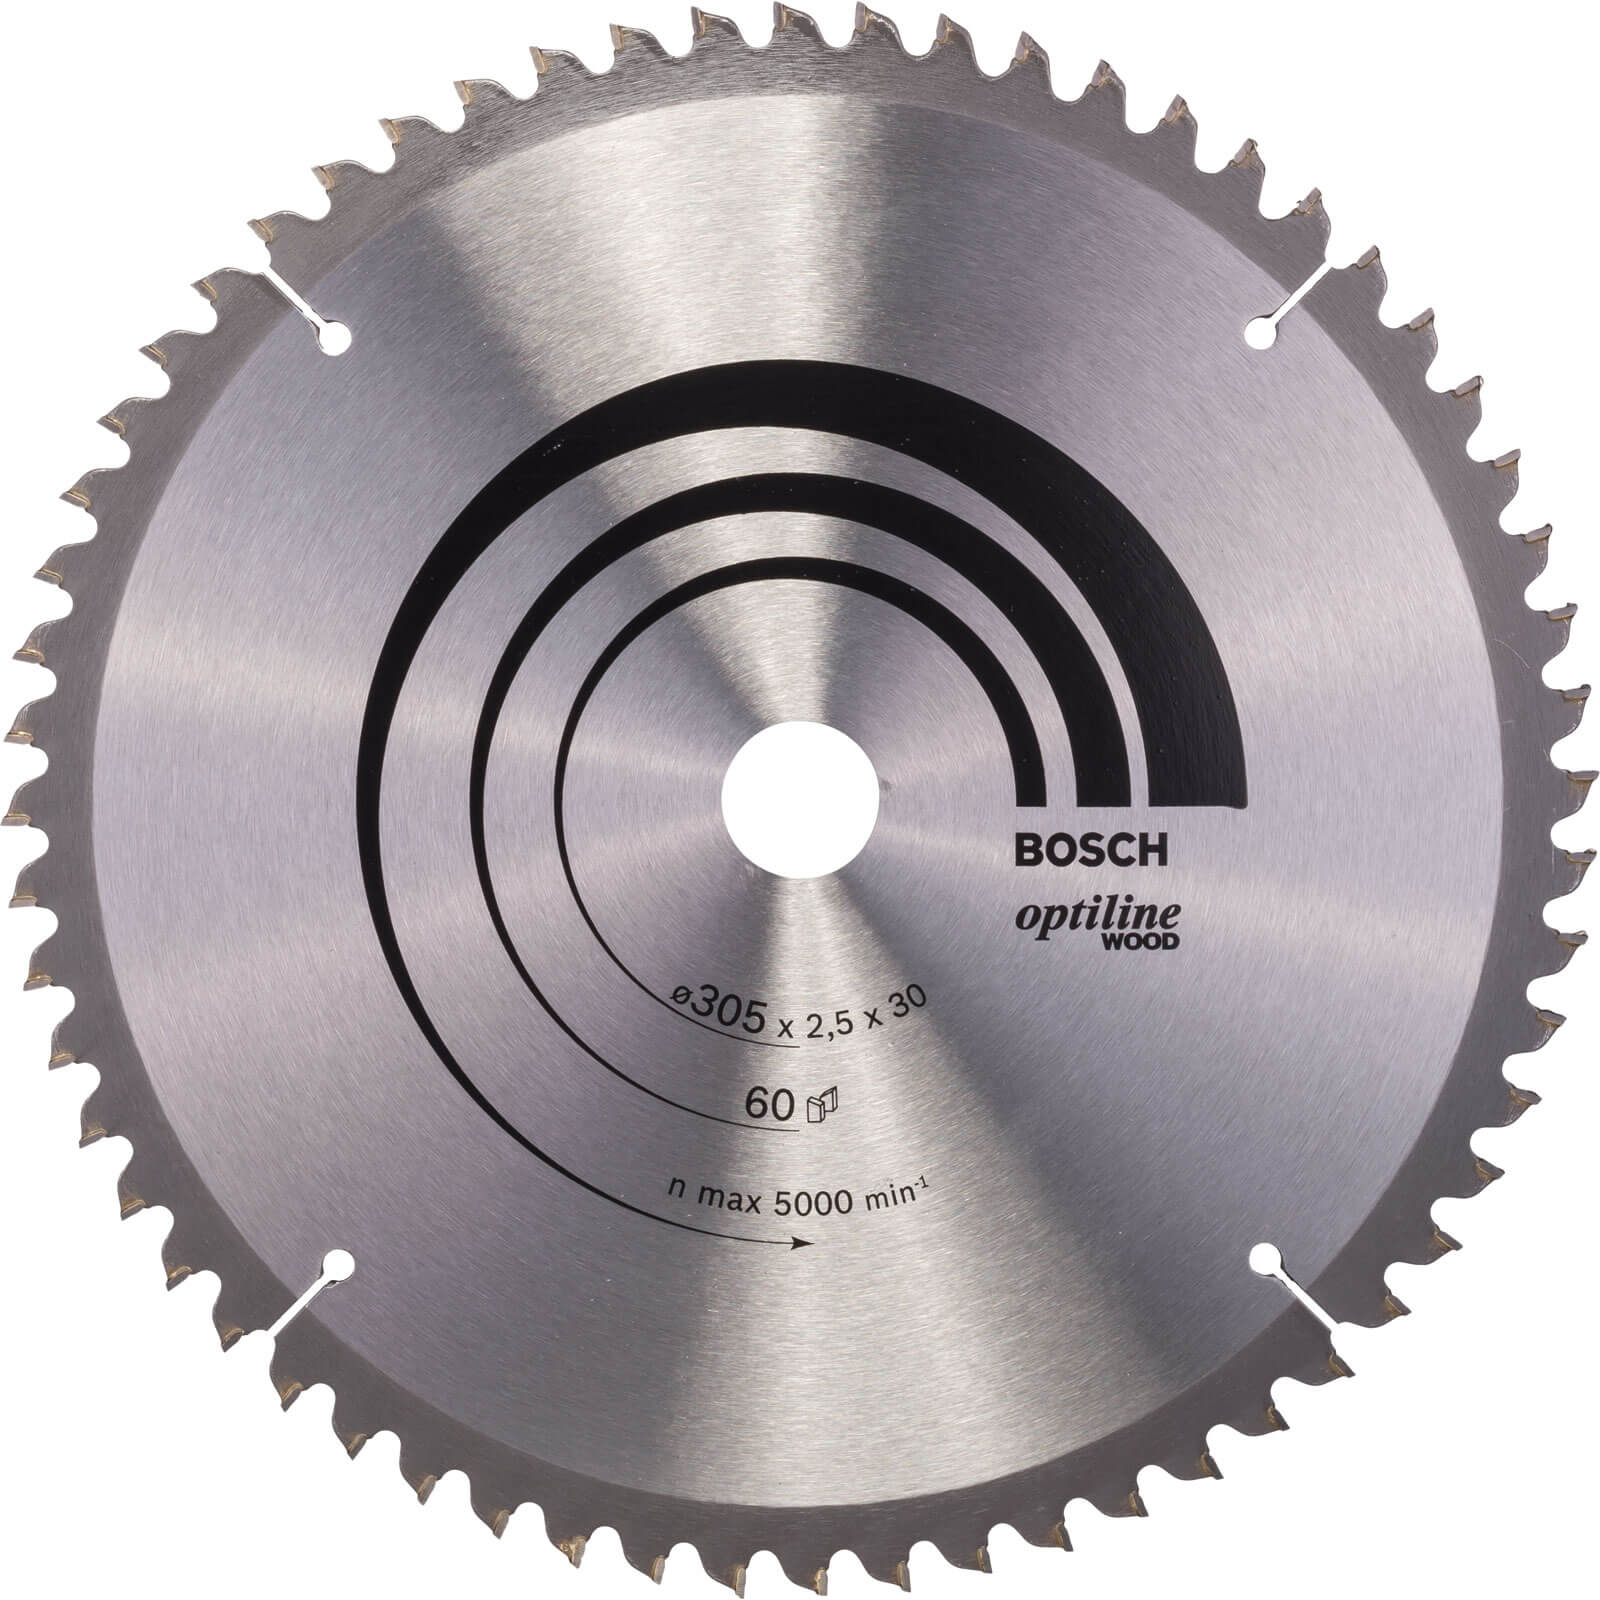 Image of Bosch Optiline Wood Cutting Mitre Saw Blade 305mm 60T 30mm